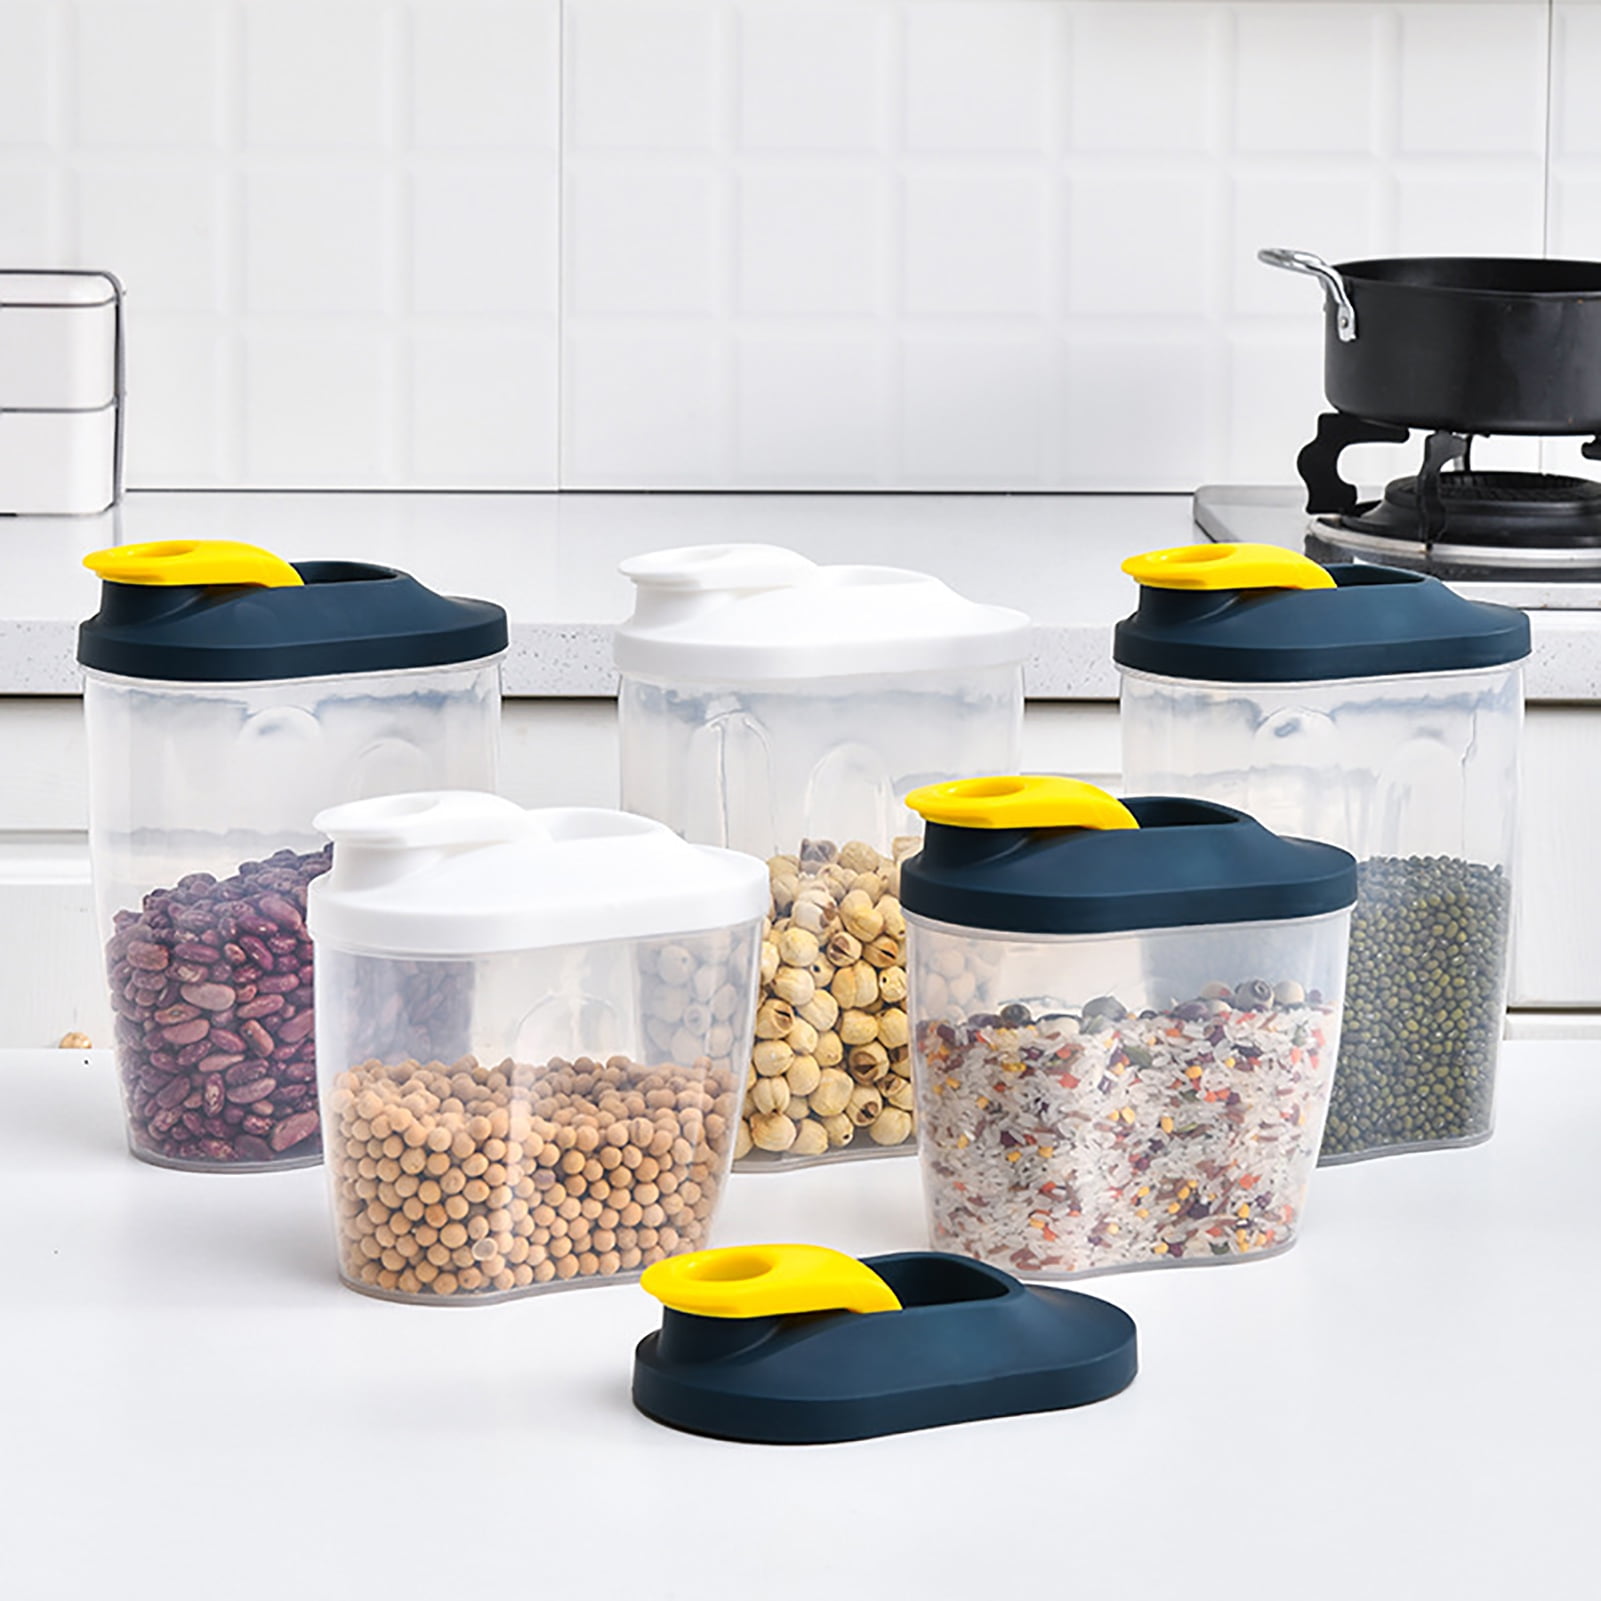 PEDECO Square Plastic Portion box with Lids.Food Storage Box,Container  Sets,Food Storage,Food Containers,Cereal Containers,use for School,Work and